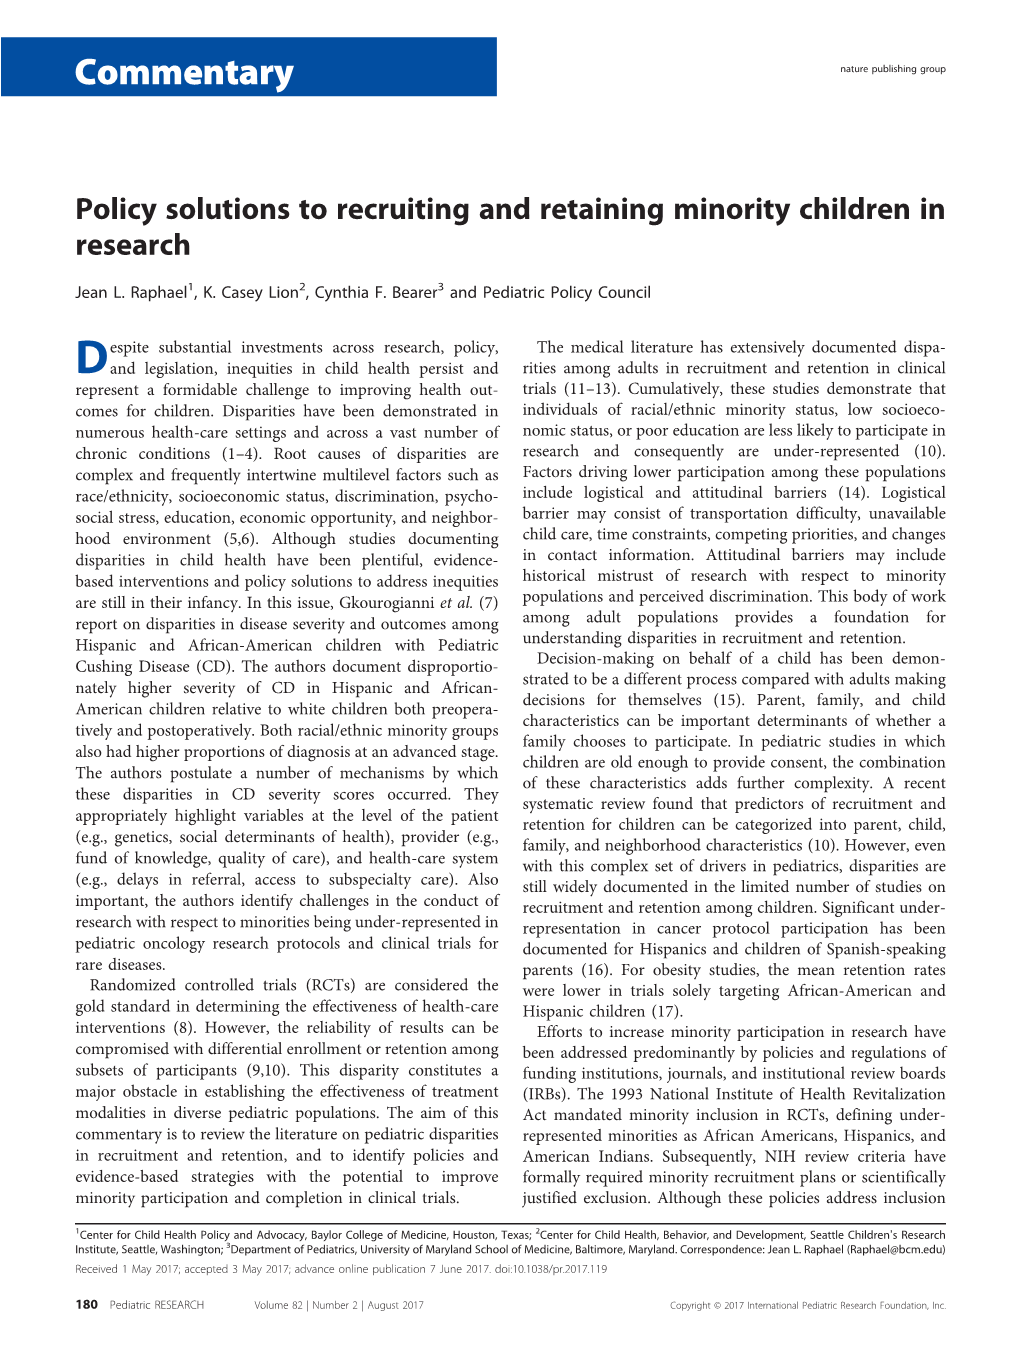 Policy Solutions to Recruiting and Retaining Minority Children in Research